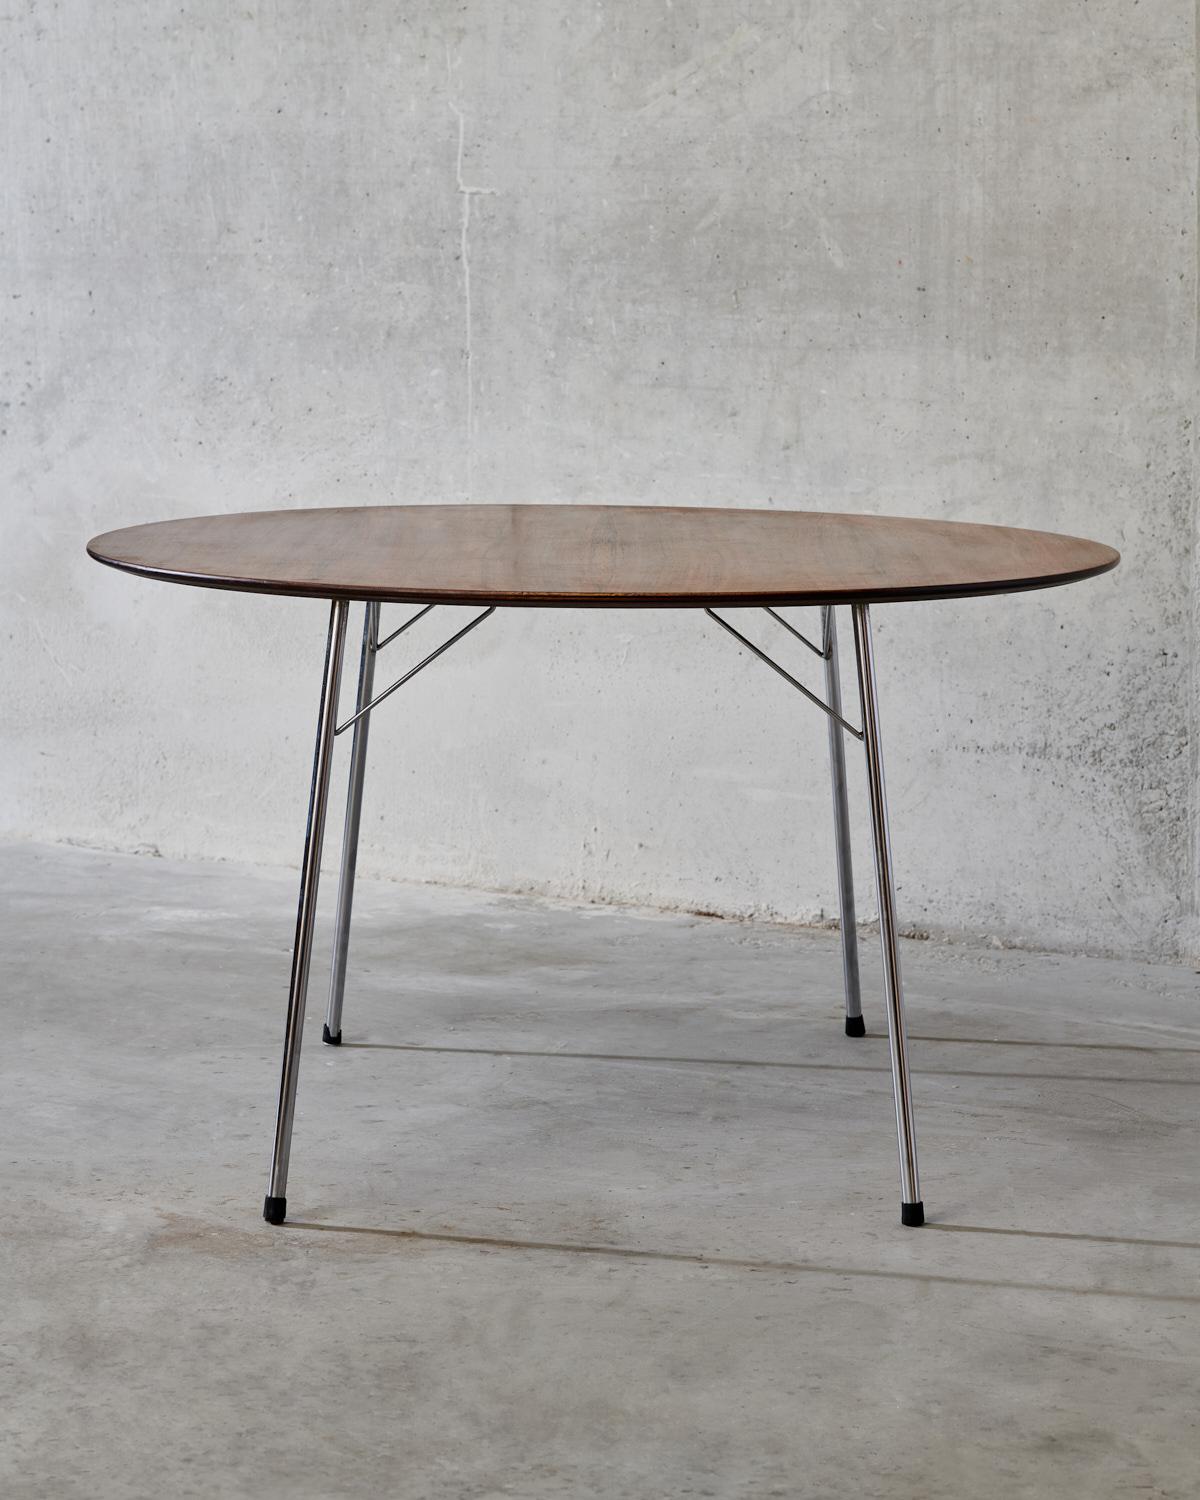 Teak dining table - Model 3600 designed by Arne Jacobsen for Fritz Hansen in Denmark around 1960. The table was purchased from the original owners who bought it in 1964 as a wedding present to themselves.
Original manufacturers mark on the